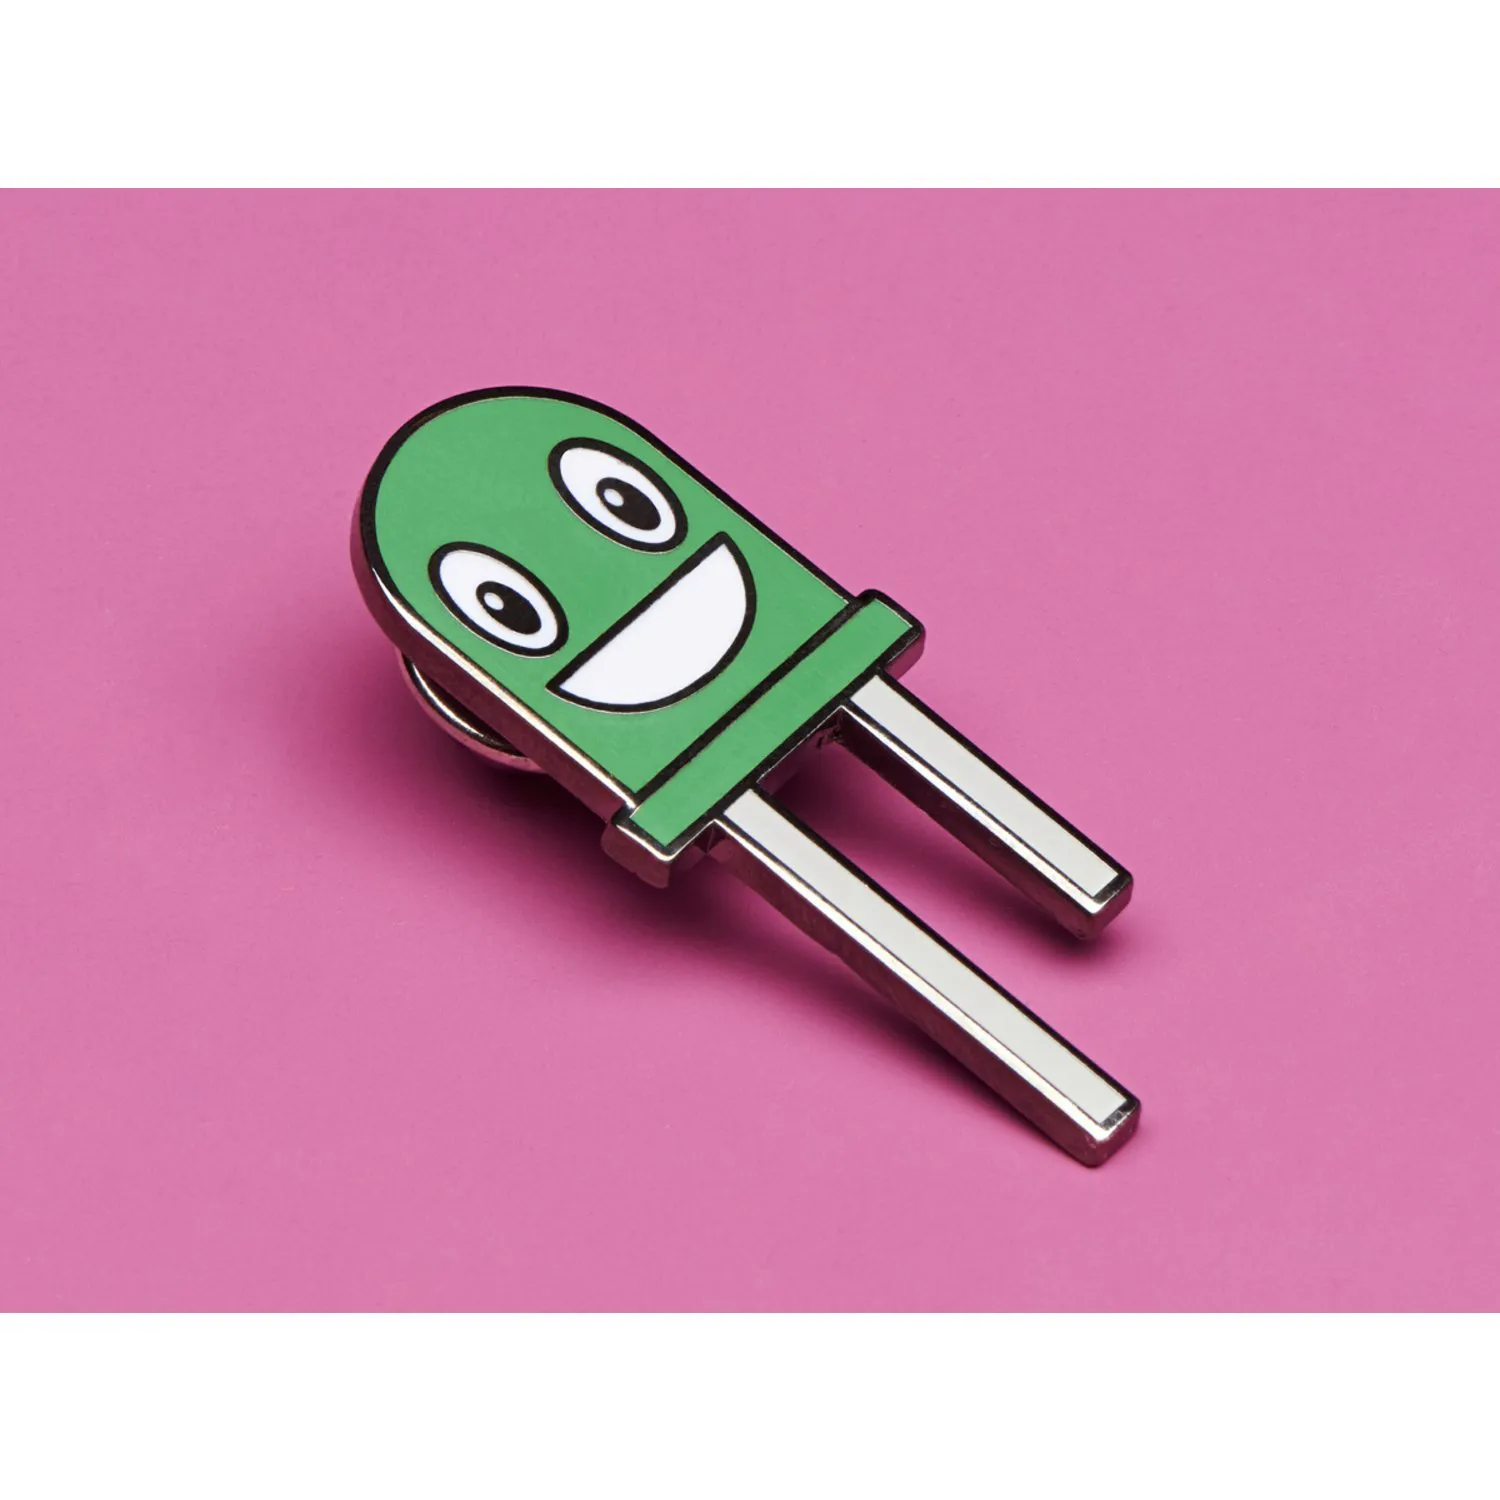 Photo of Gus the Green LED Limited Edition Enamel Pin